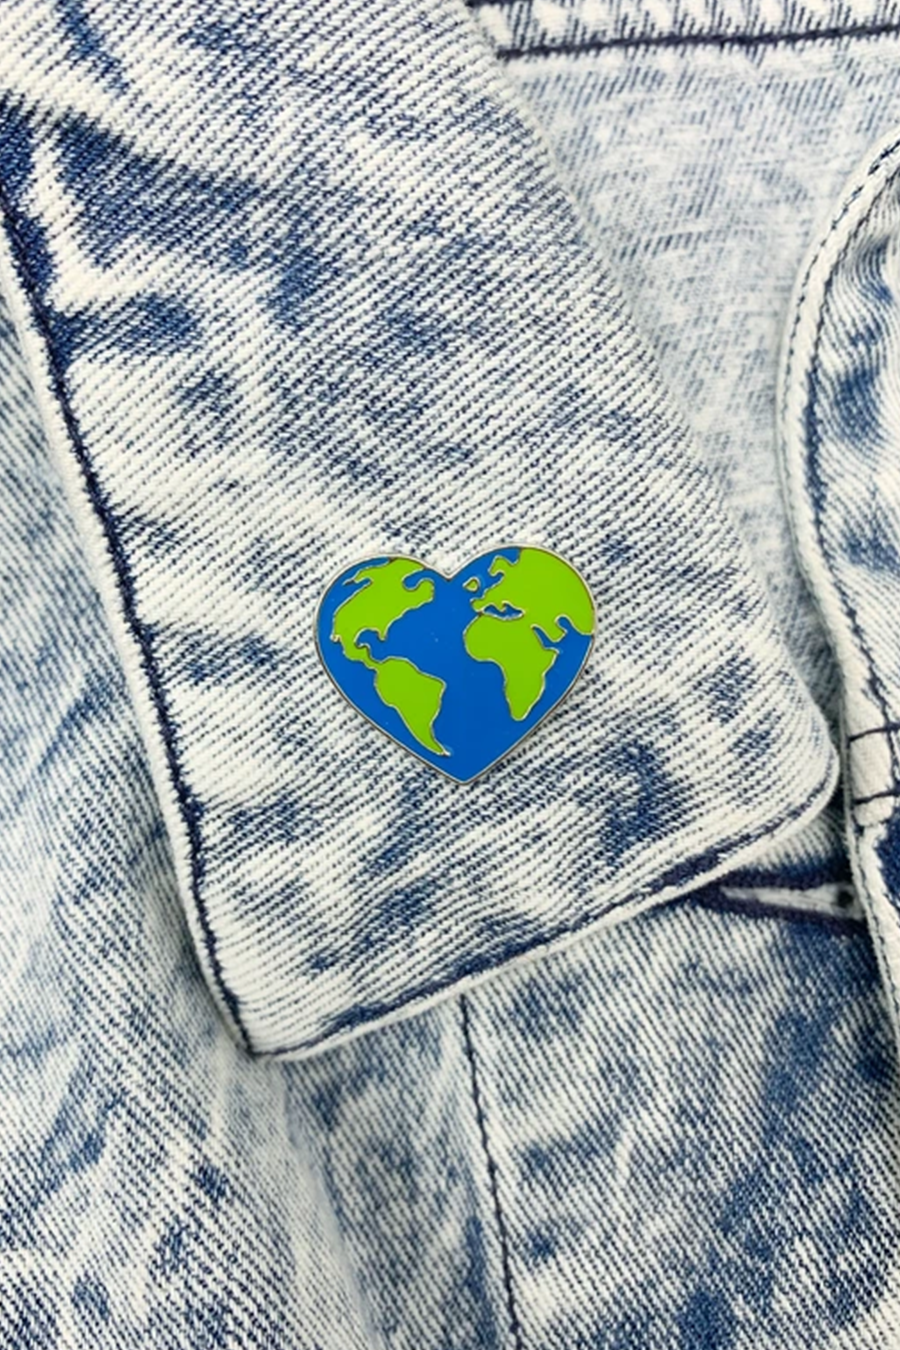 Mother Earth Enamel Pin - Main Image Number 1 of 1